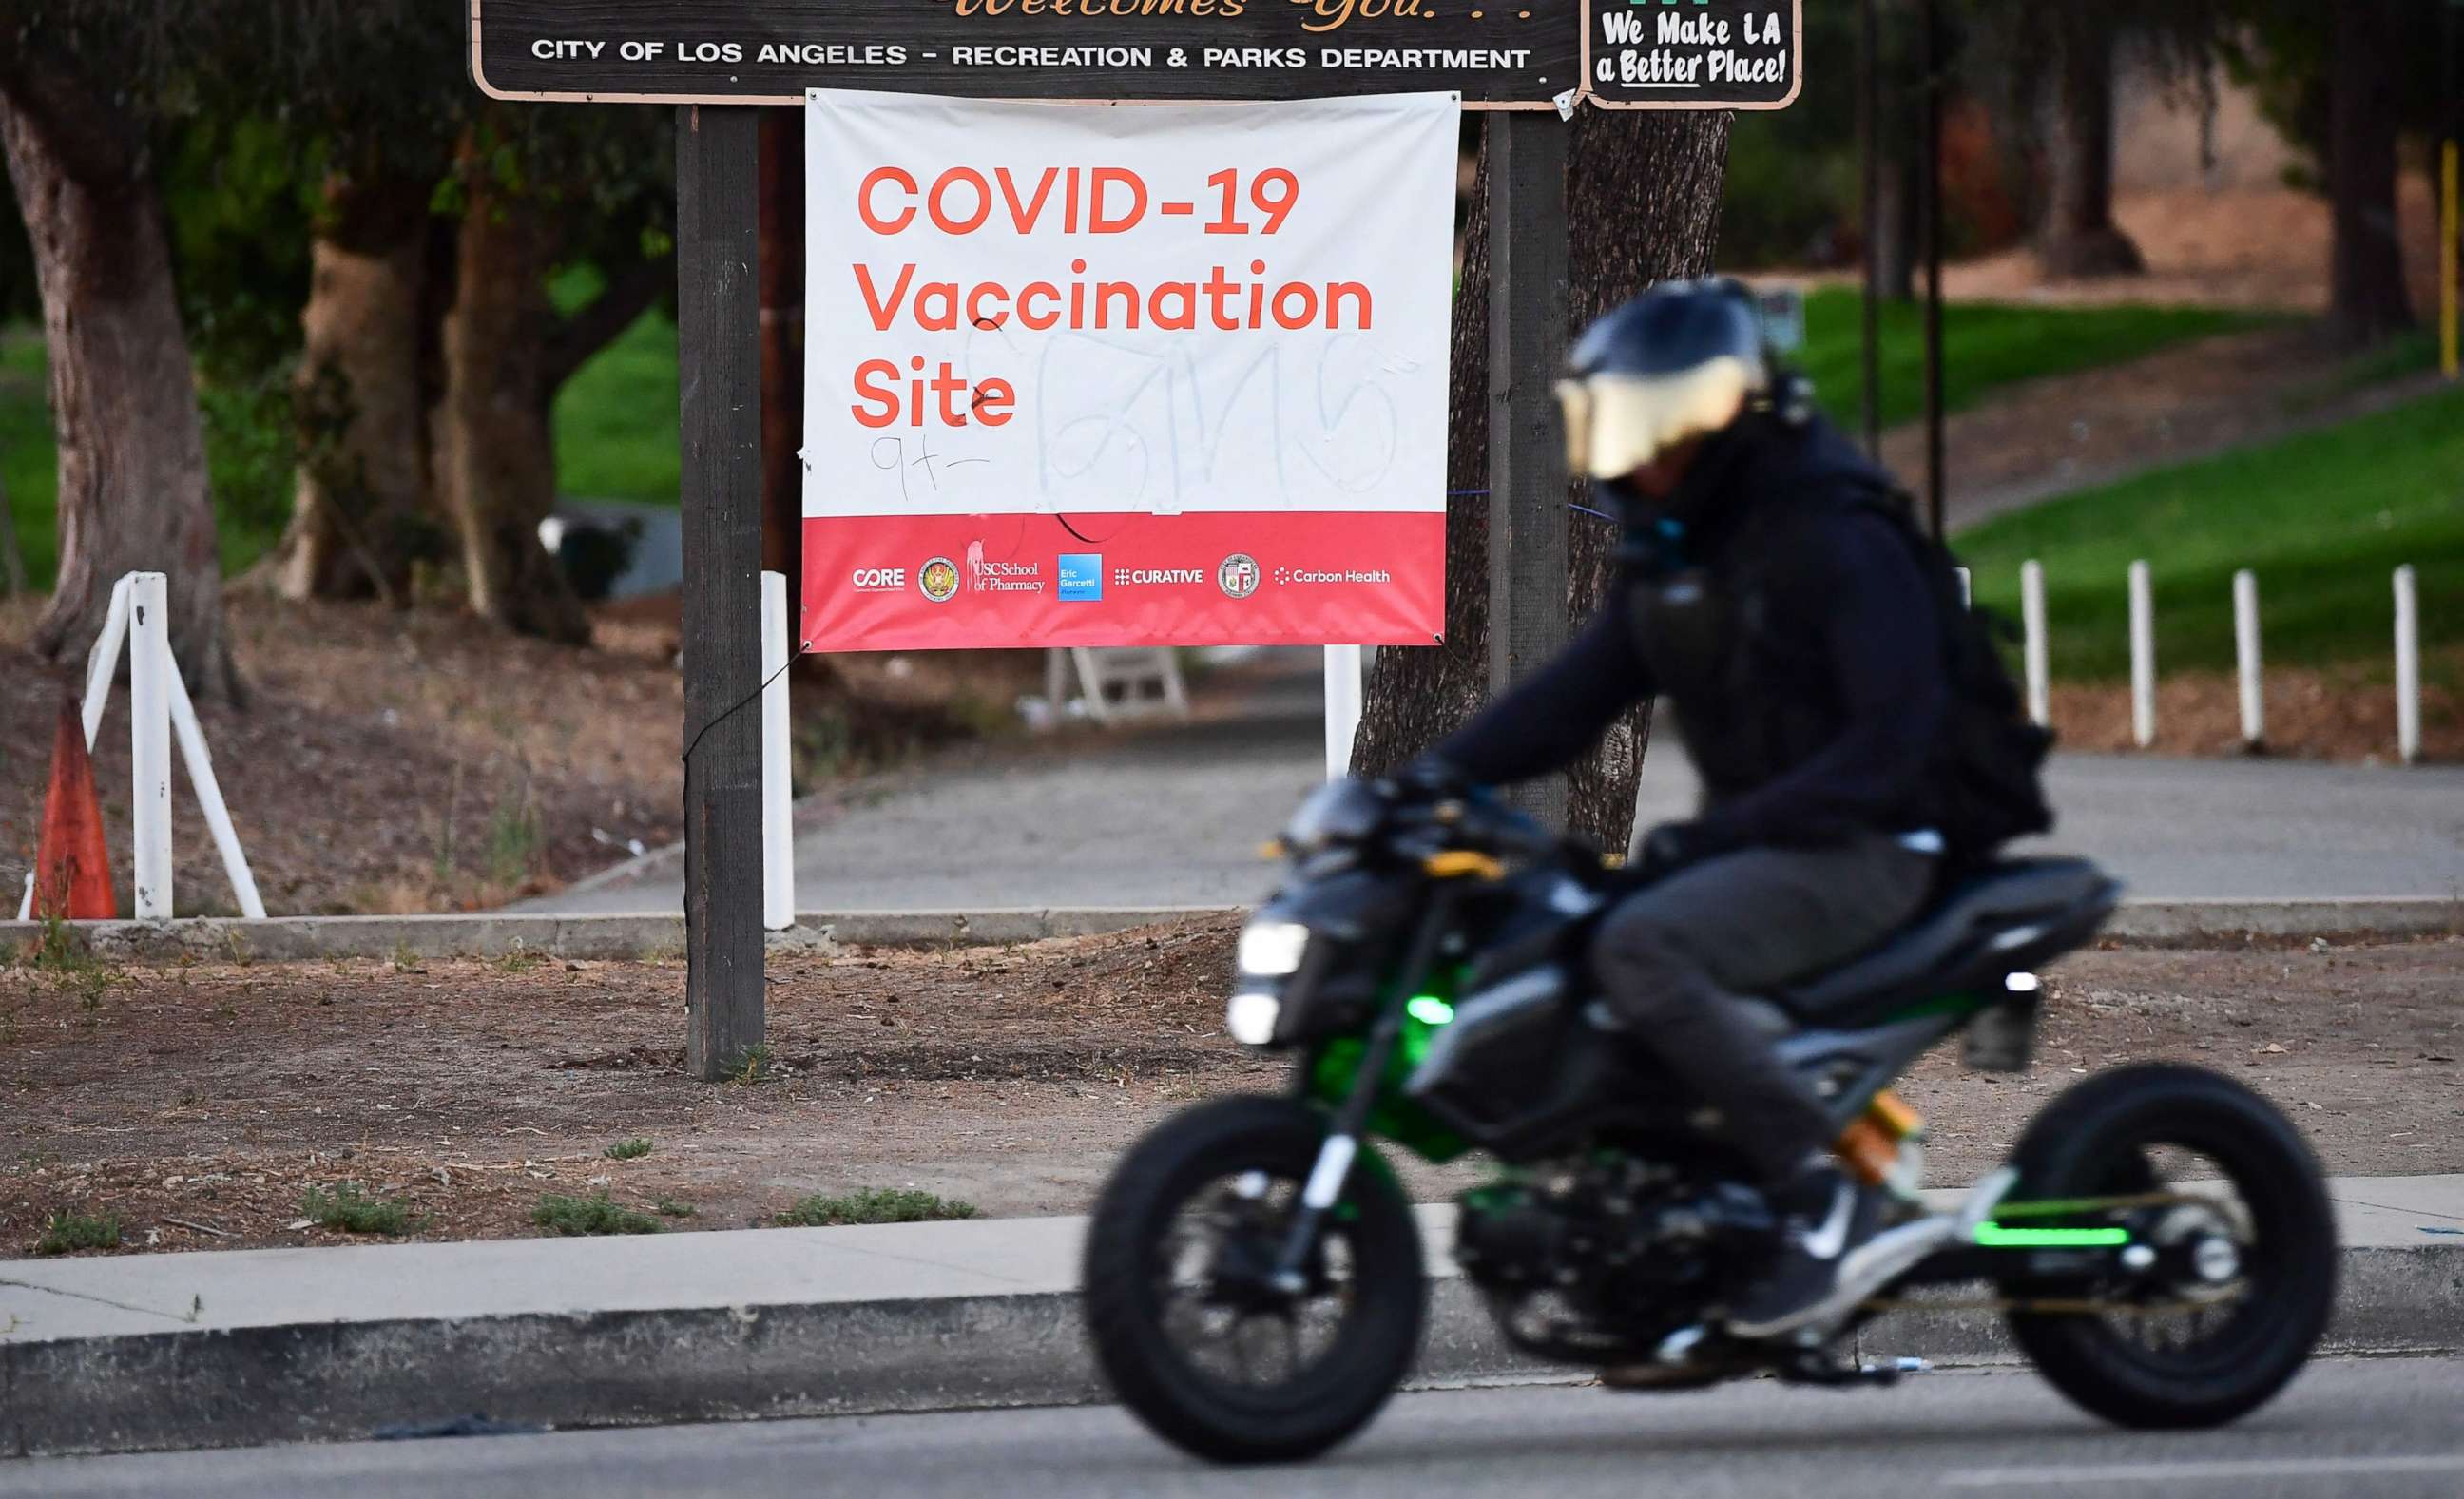 PHOTO: A motorcyclist rides past a COVID-19 vaccination site in Los Angeles, California, on July 6, 2021.